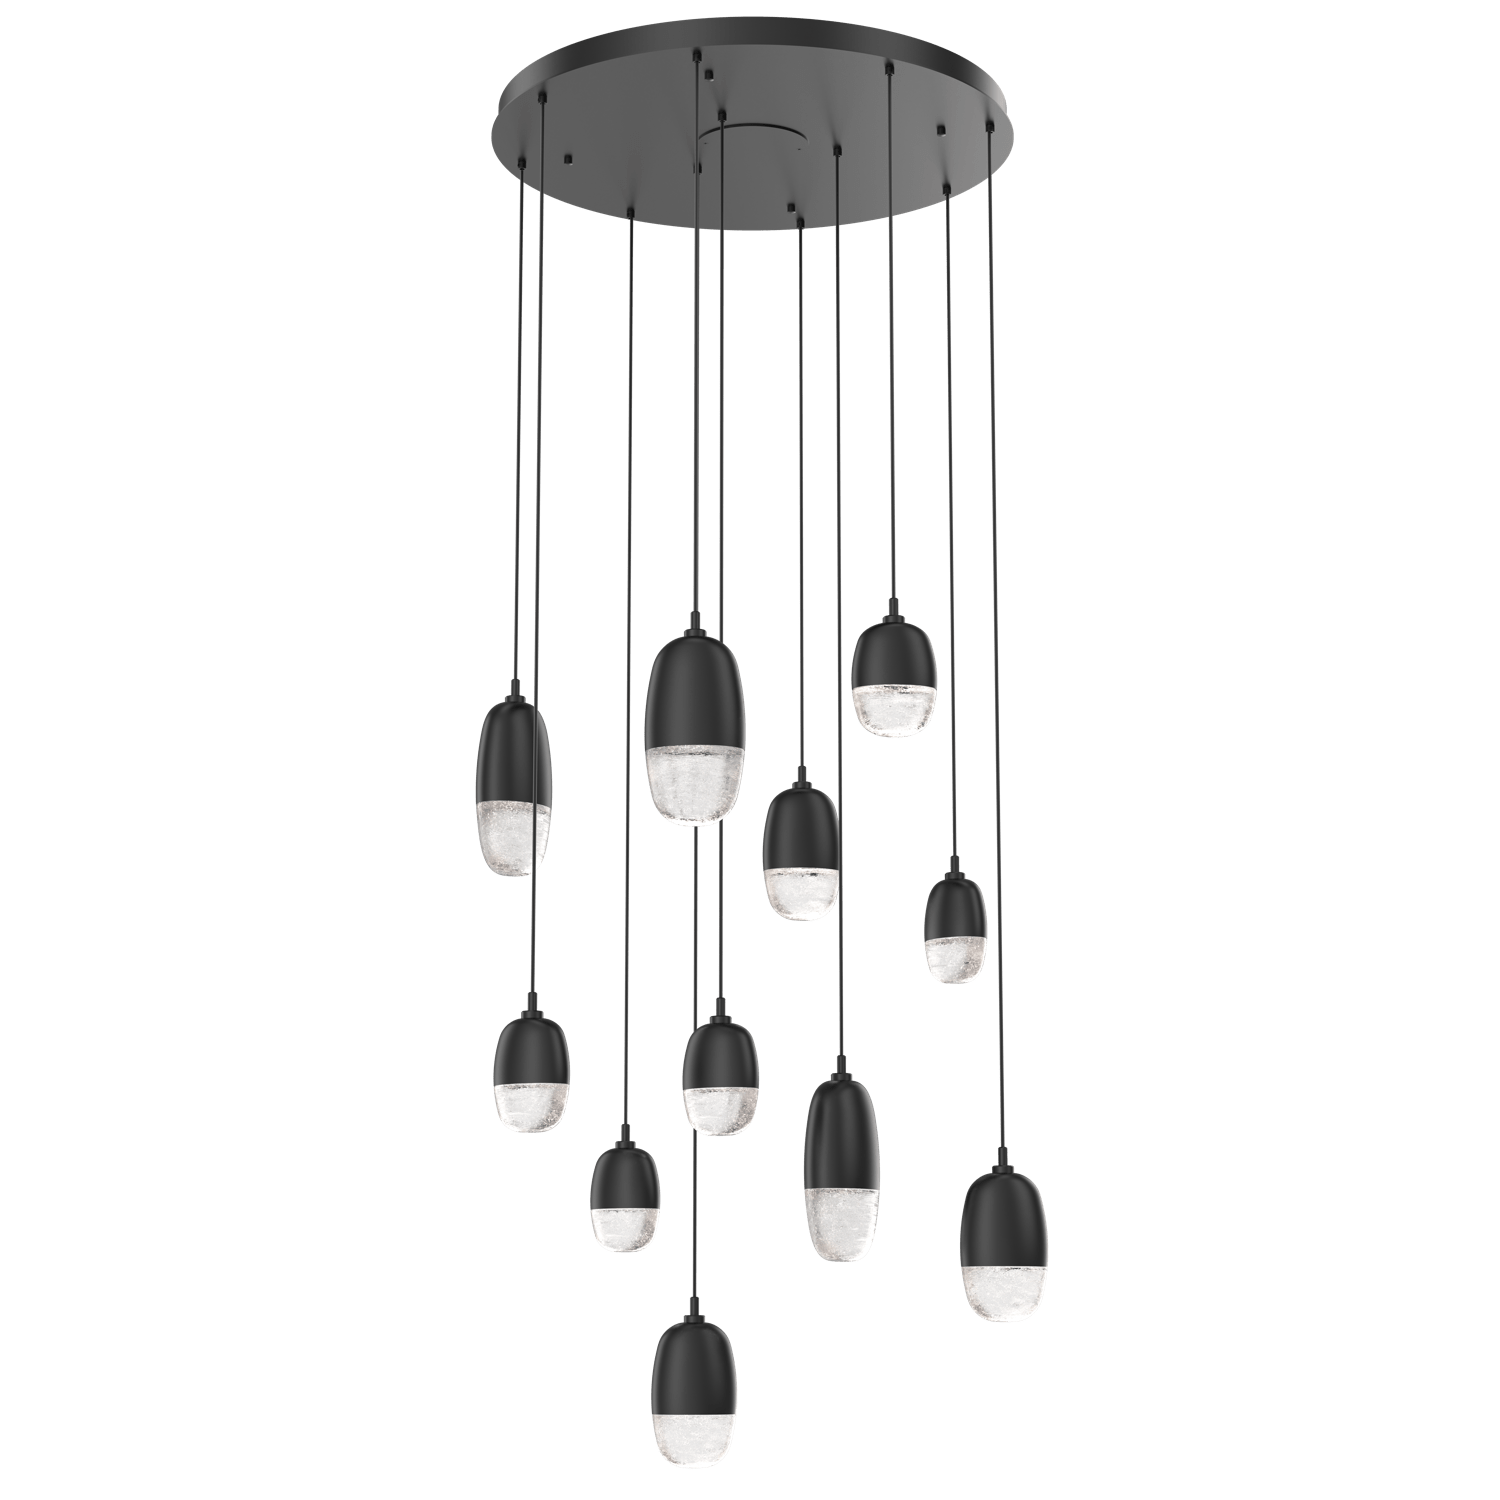 CHB0079-11-MB-Hammerton-Studio-Pebble-11-light-round-pendant-chandelier-with-matte-black-finish-and-clear-cast-glass-shades-and-LED-lamping